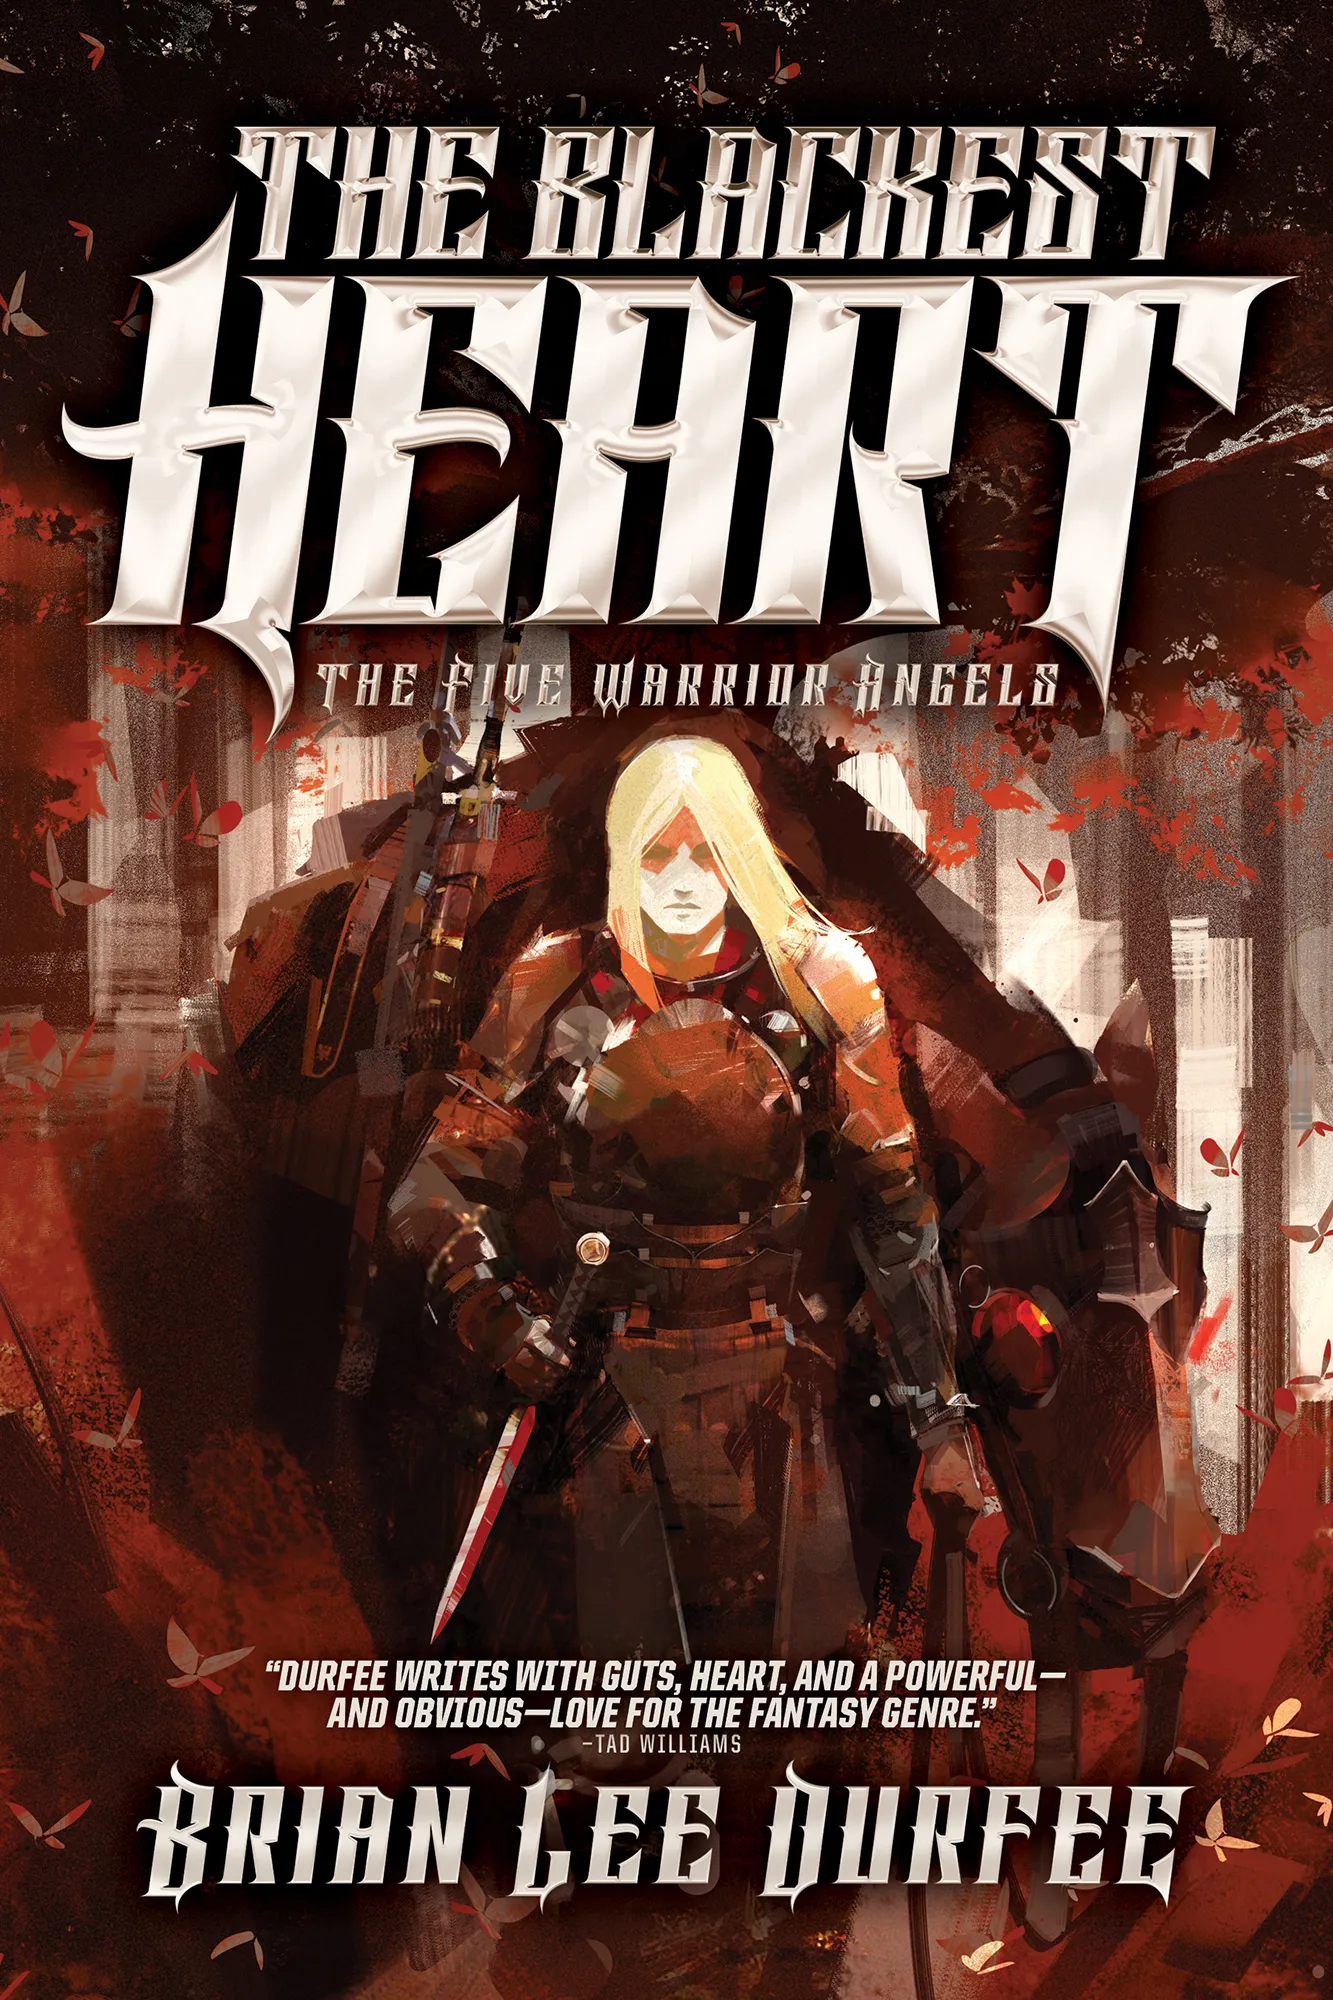 The Blackest Heart (The Five Warrior Angels #2)